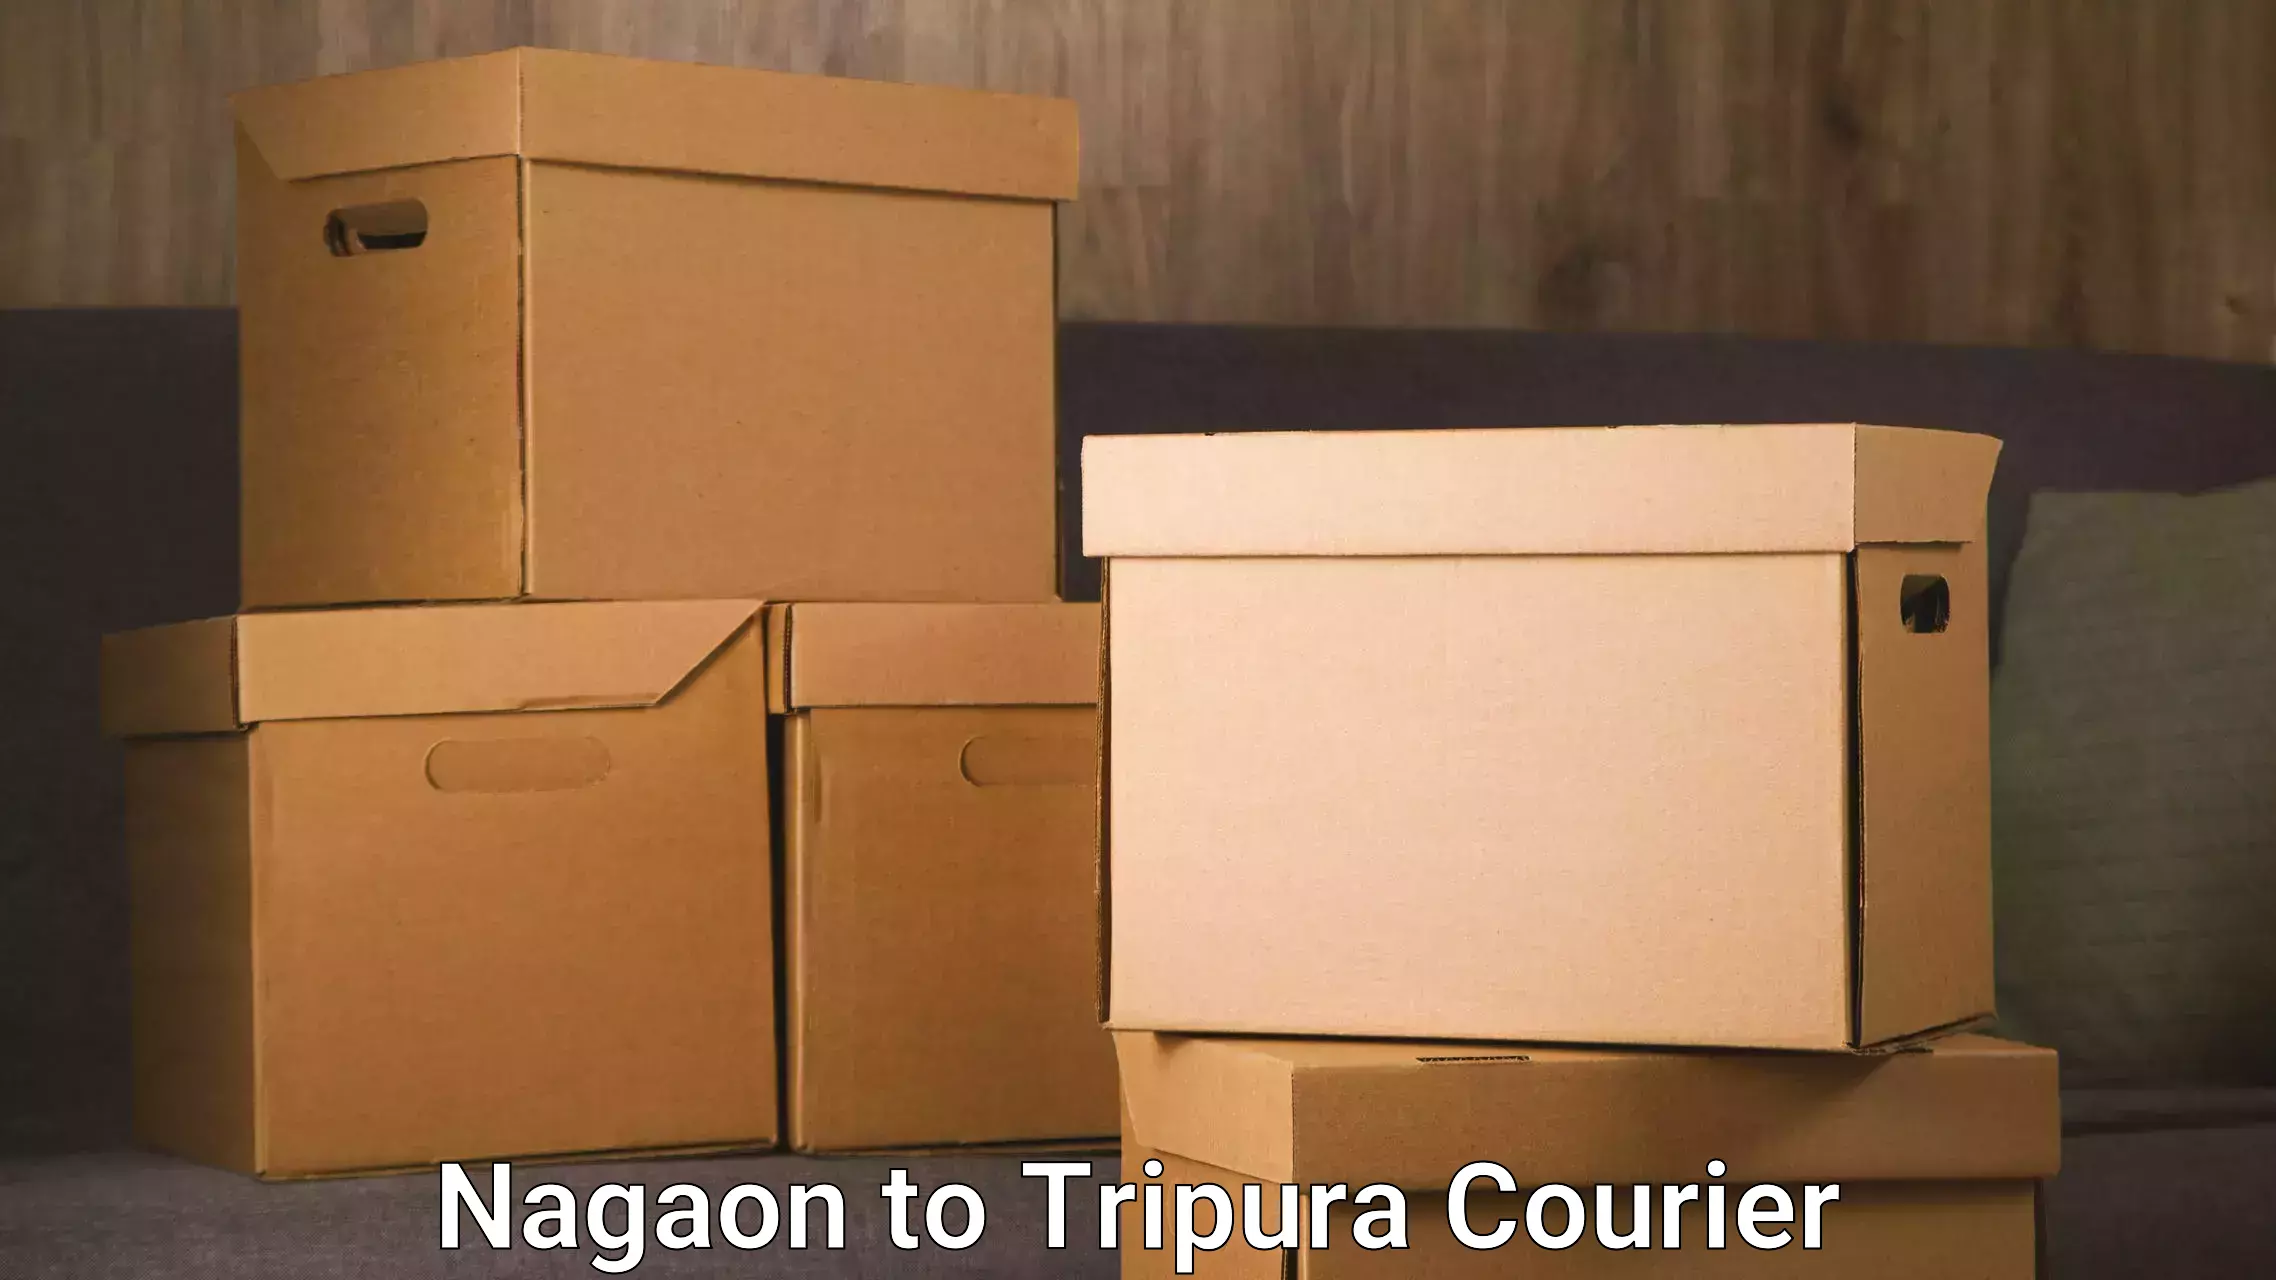 State-of-the-art courier technology Nagaon to Amarpur